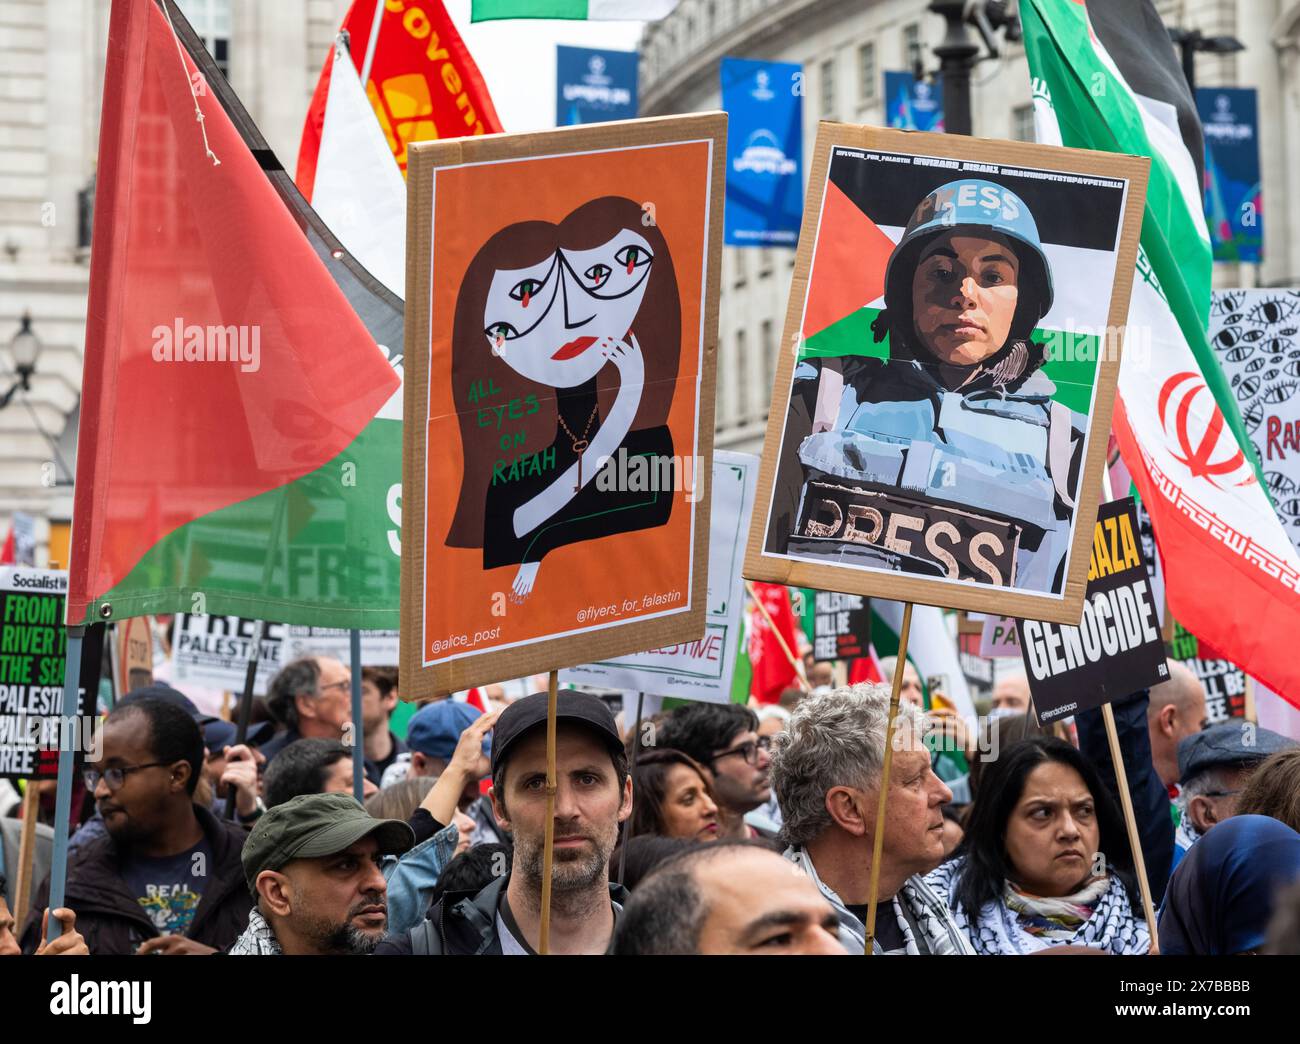 London, UK. 18 May 2024: Protesters hold placards at the Nakba 76 March for Palestine against Israeli attacks on Gaza in central London, UK. A huge march marked the 76th anniversary of the 'Palestinian Catastrophe' in 1948 and called for a ceasefire in Gaza. Stock Photo